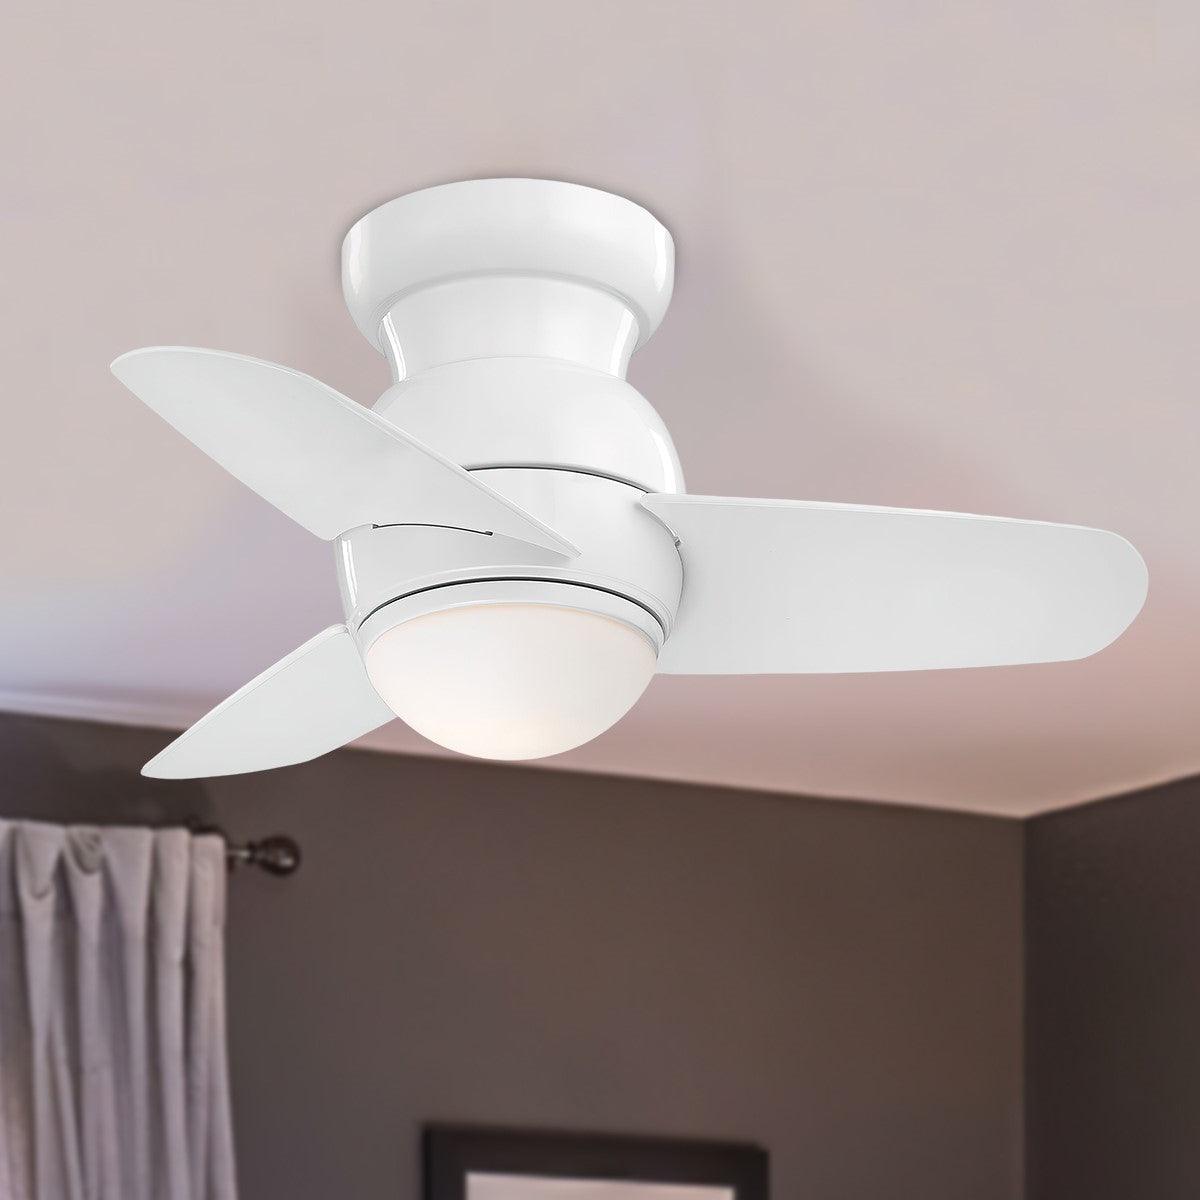 Spacesaver 26 Inch Modern Hugger Ceiling Fan With Light, Wall Control Included